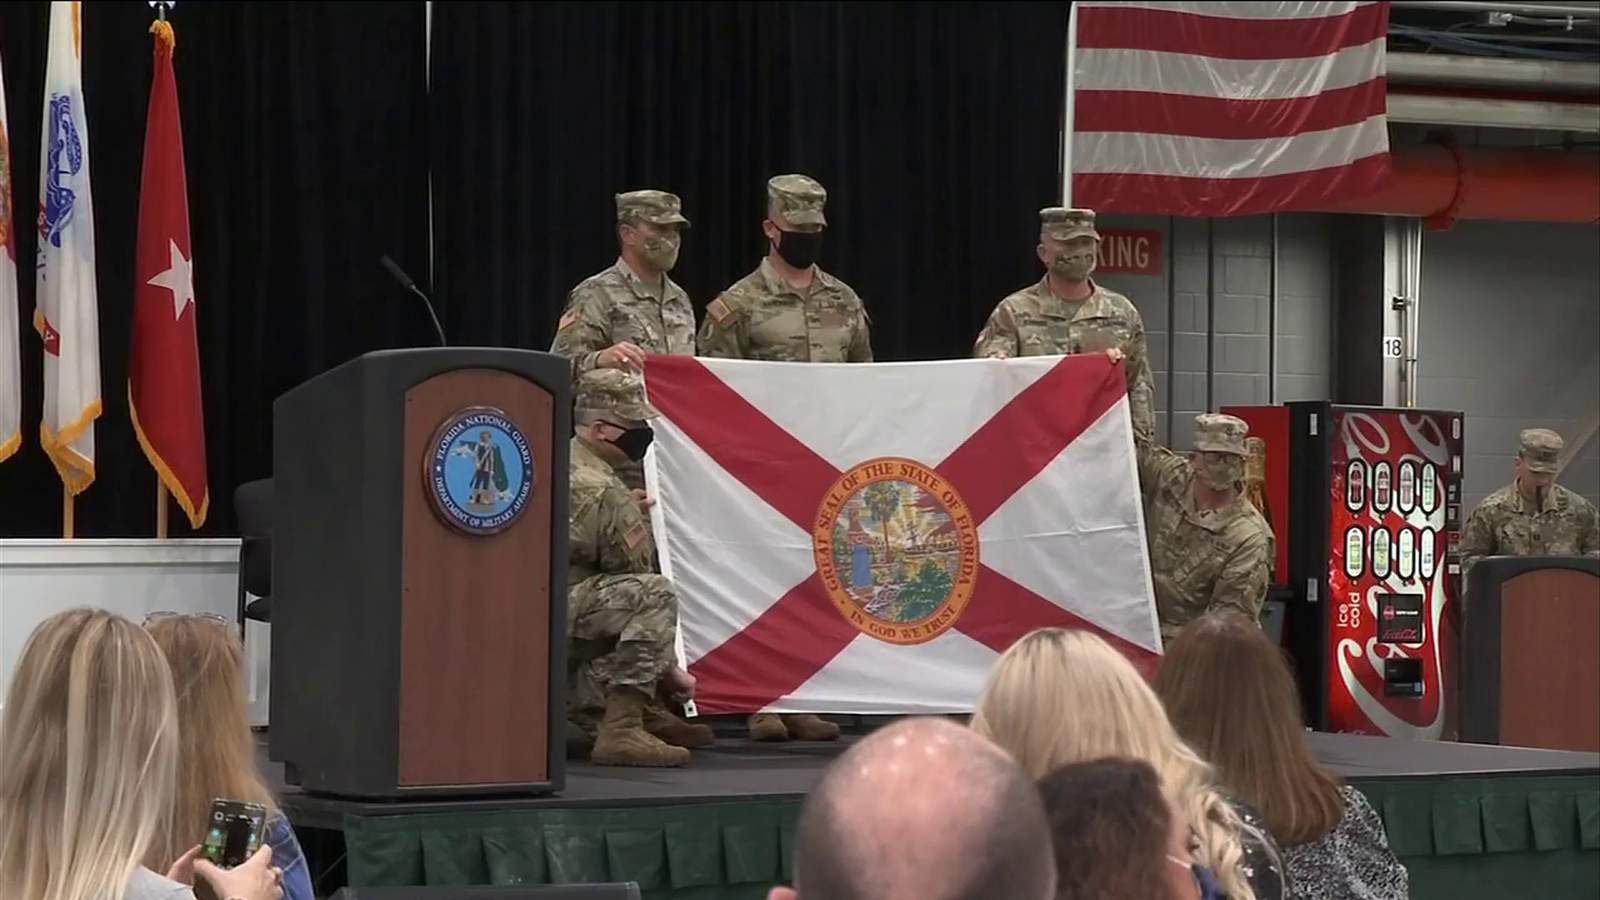 40 members of Florida National Guard celebrated at Cecil Airport deployment ceremony